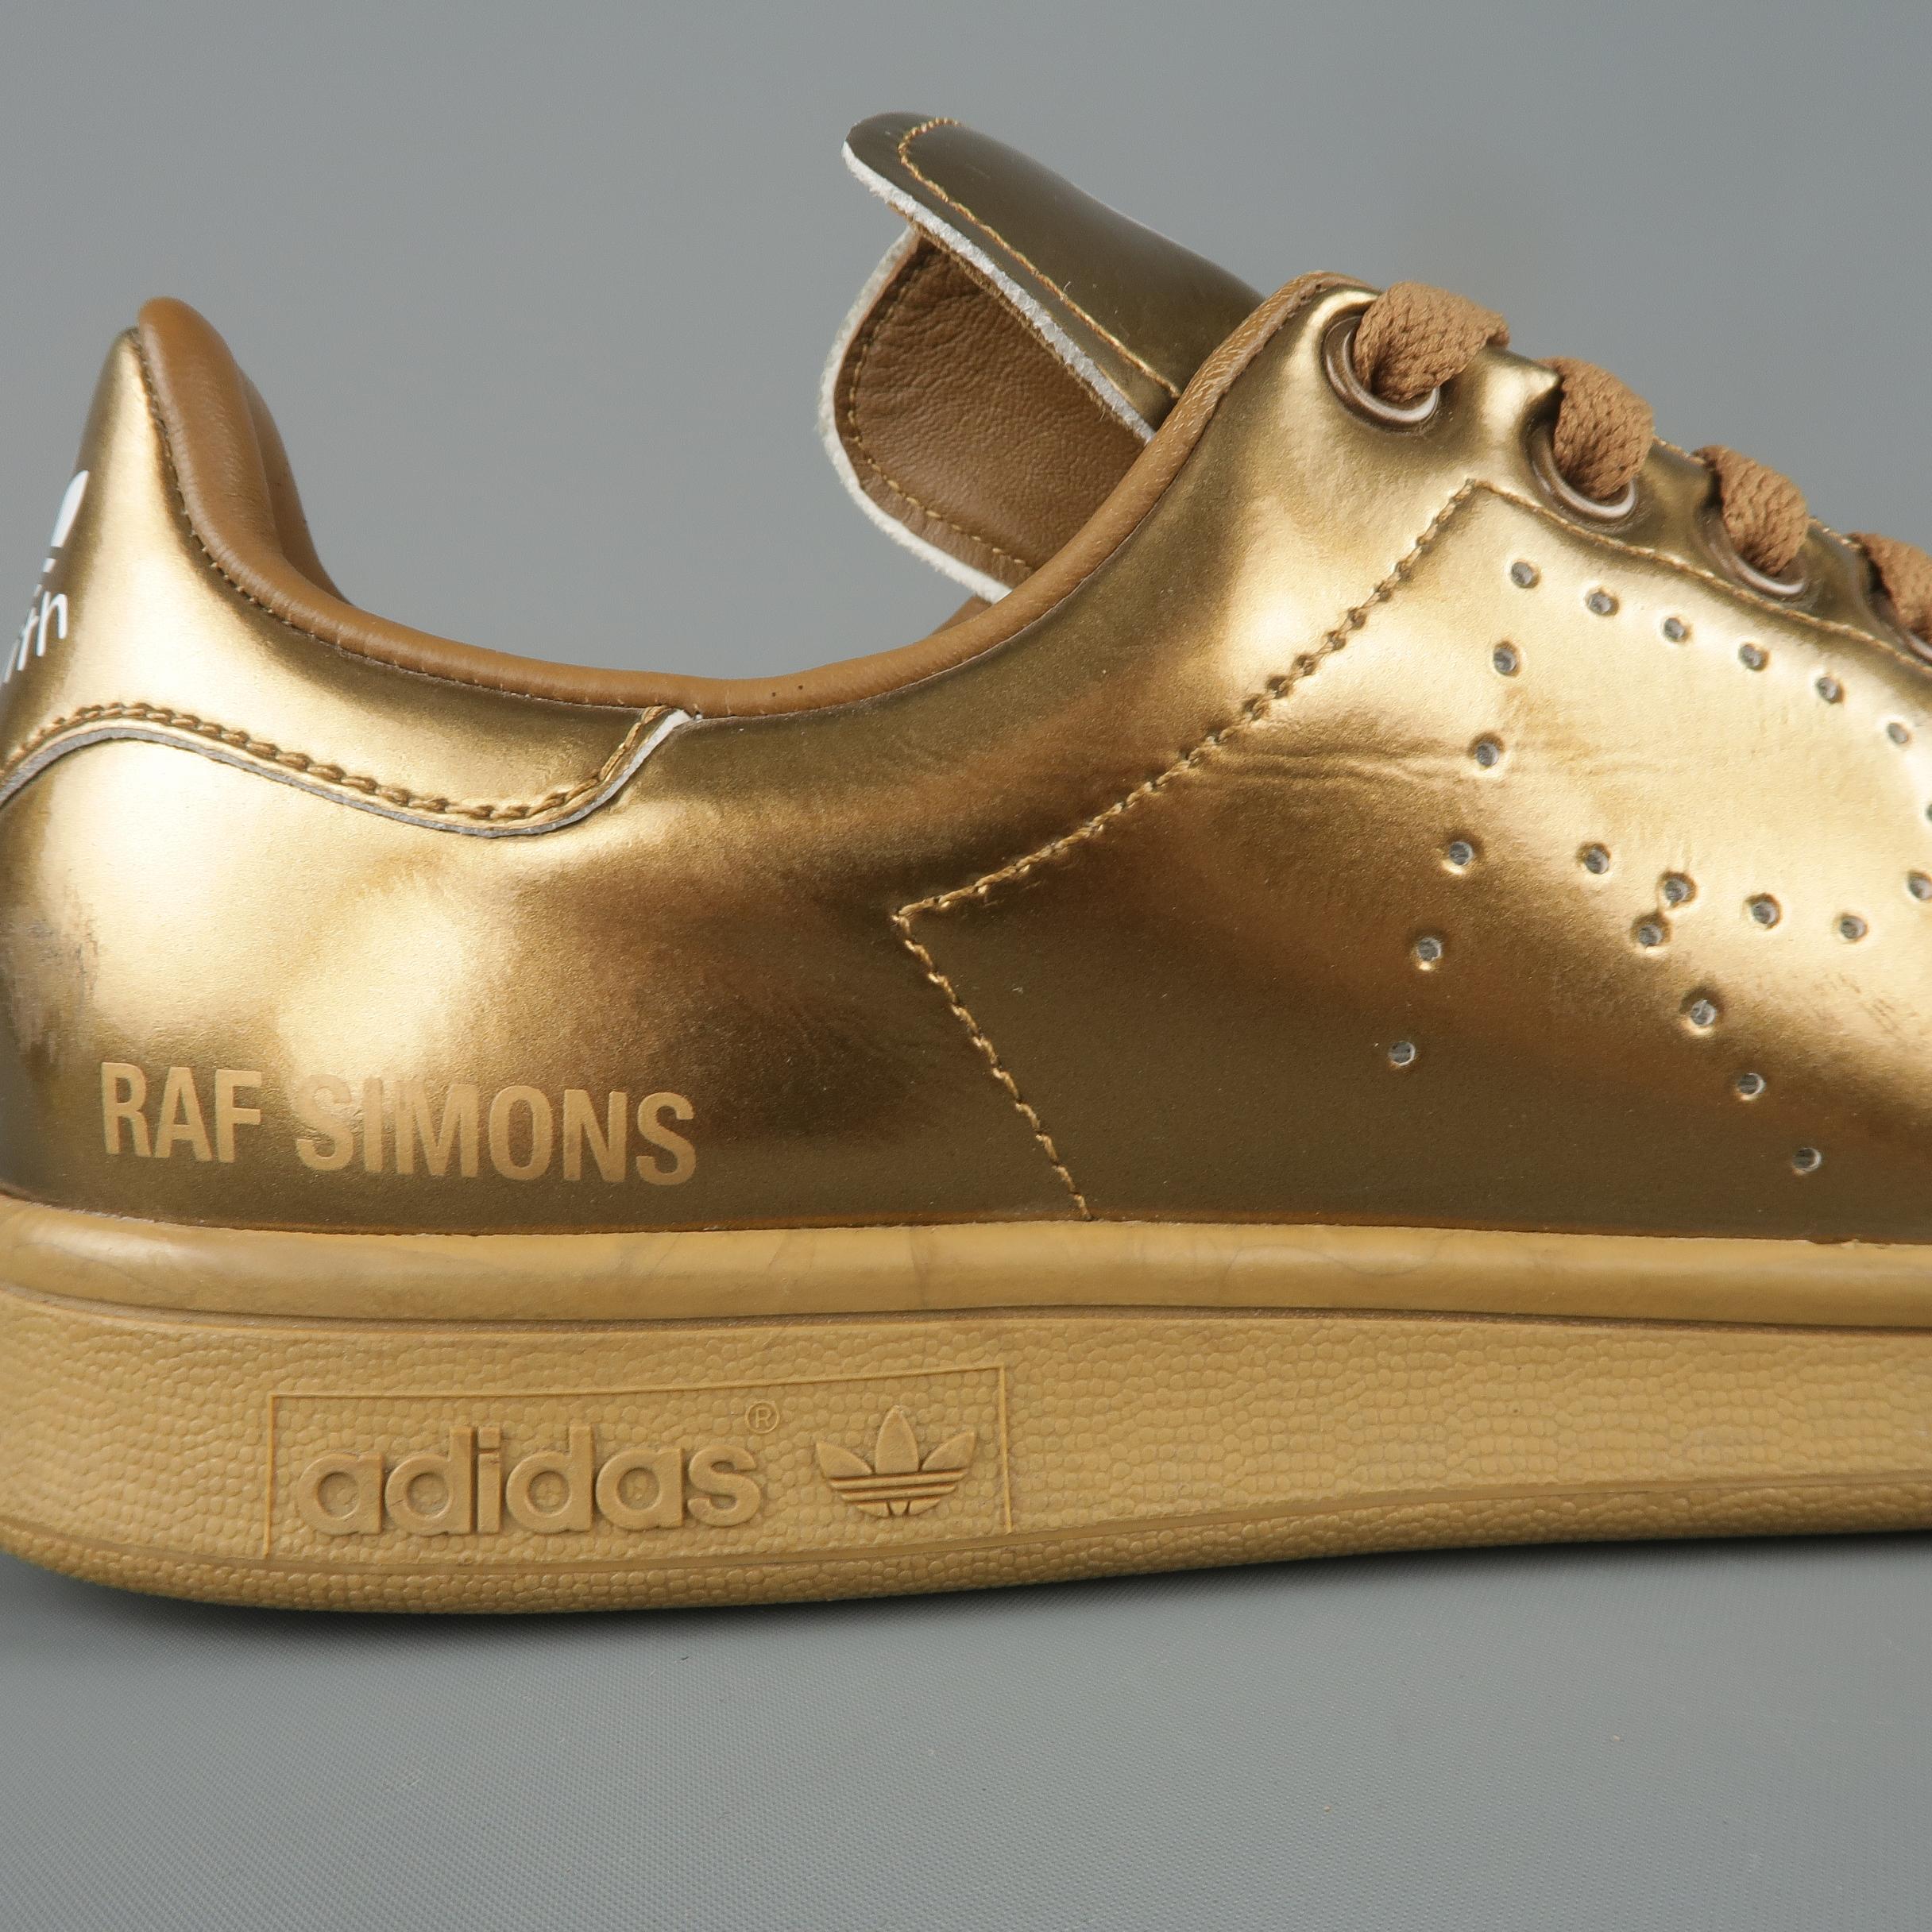 RAF SIMONS for ADIDAS Stan Smith low top sneakers come in metallic copper leather with perforated R, stamped tongue, and rubber sole. With Box.
 
Excellent Pre-Owned Condition.
Marked: US 8.5